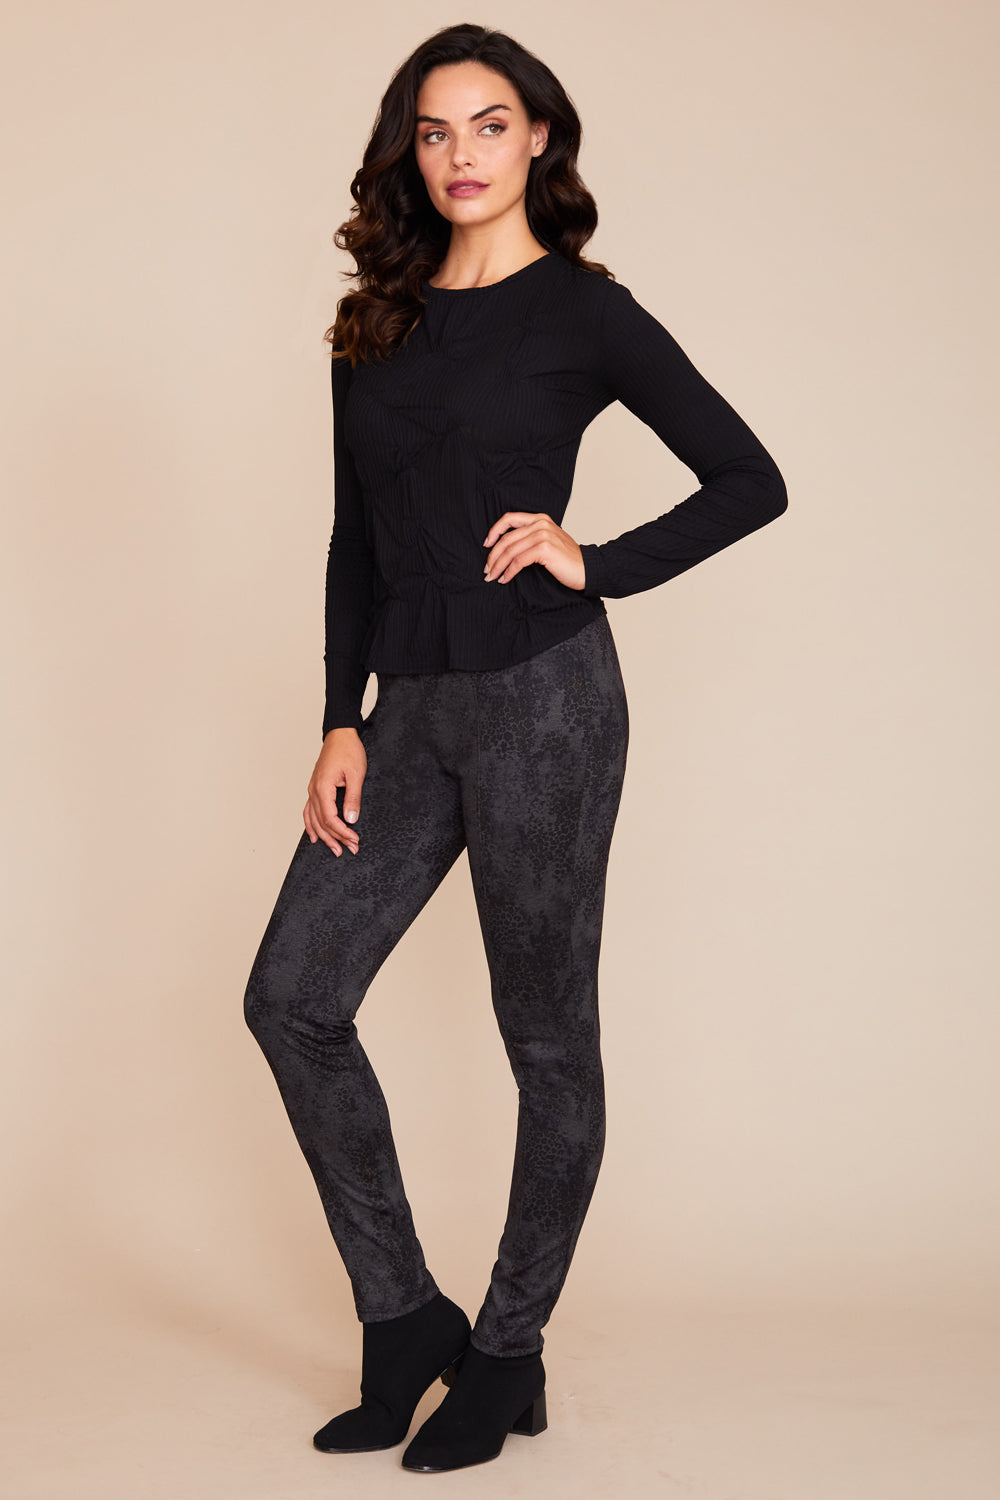 Colby Legging - Printed Knit: FINAL SALE